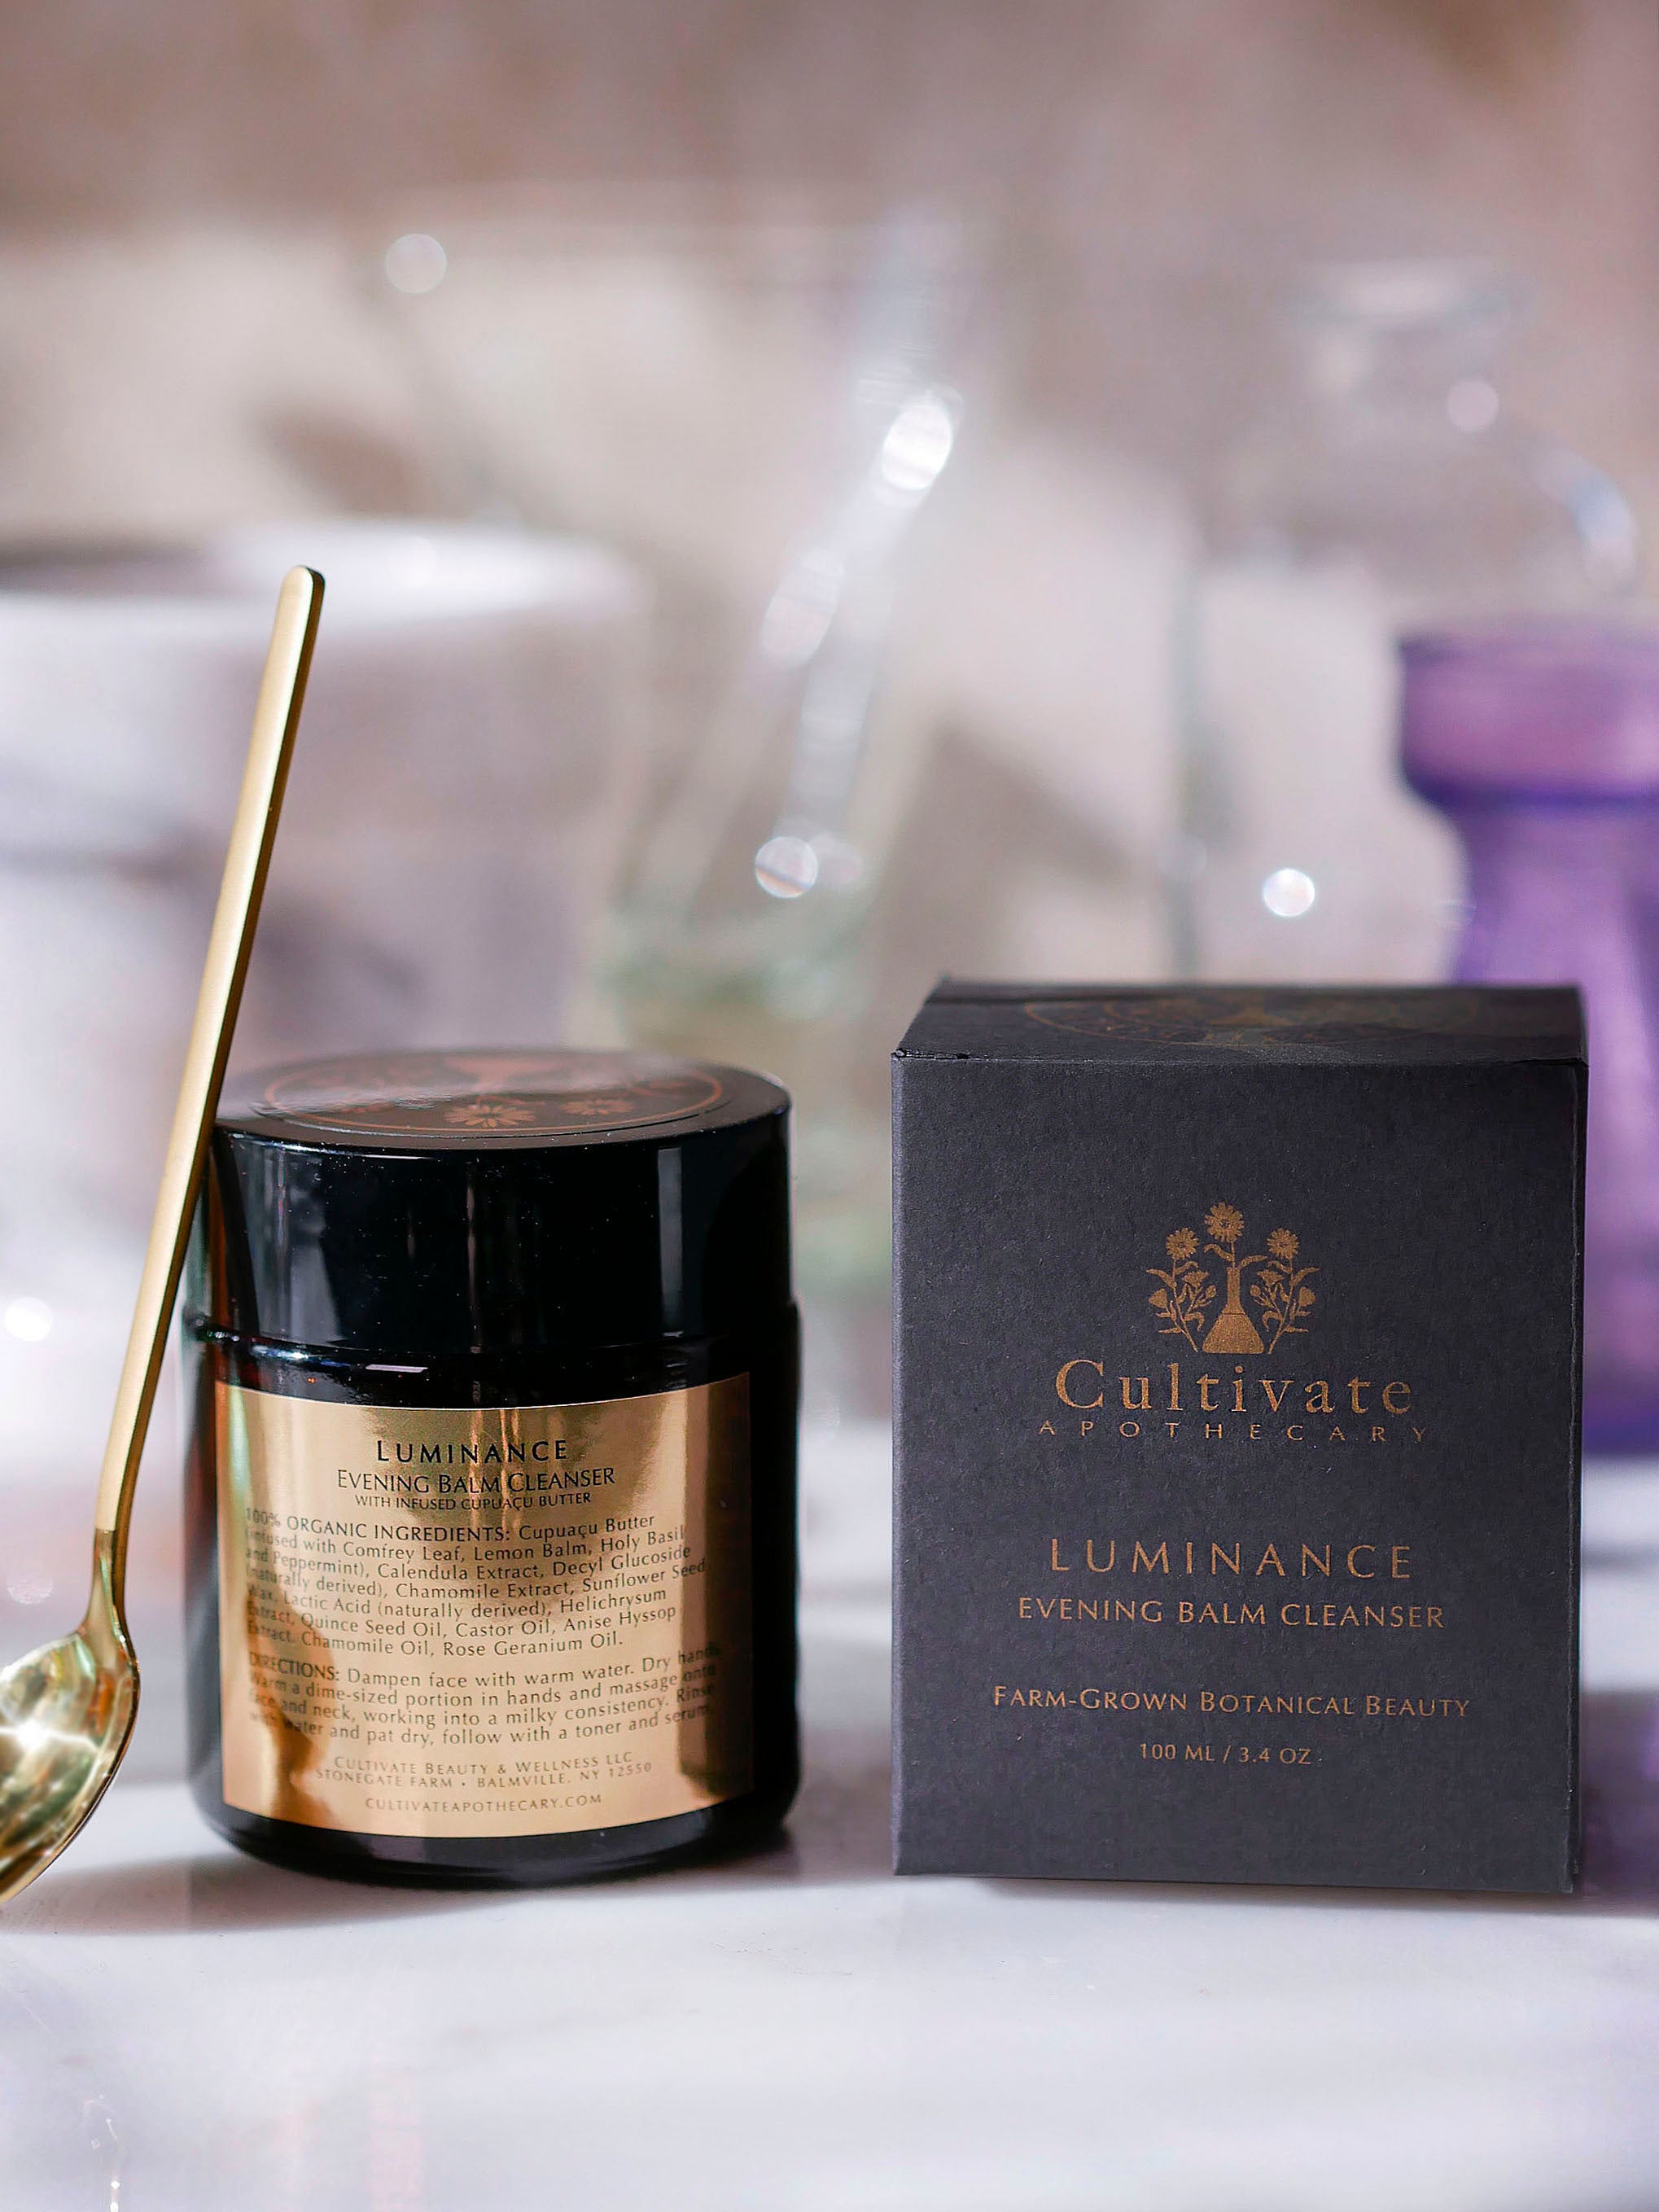 A gold face mask spoon leaning against the evening balm cleanser product box.